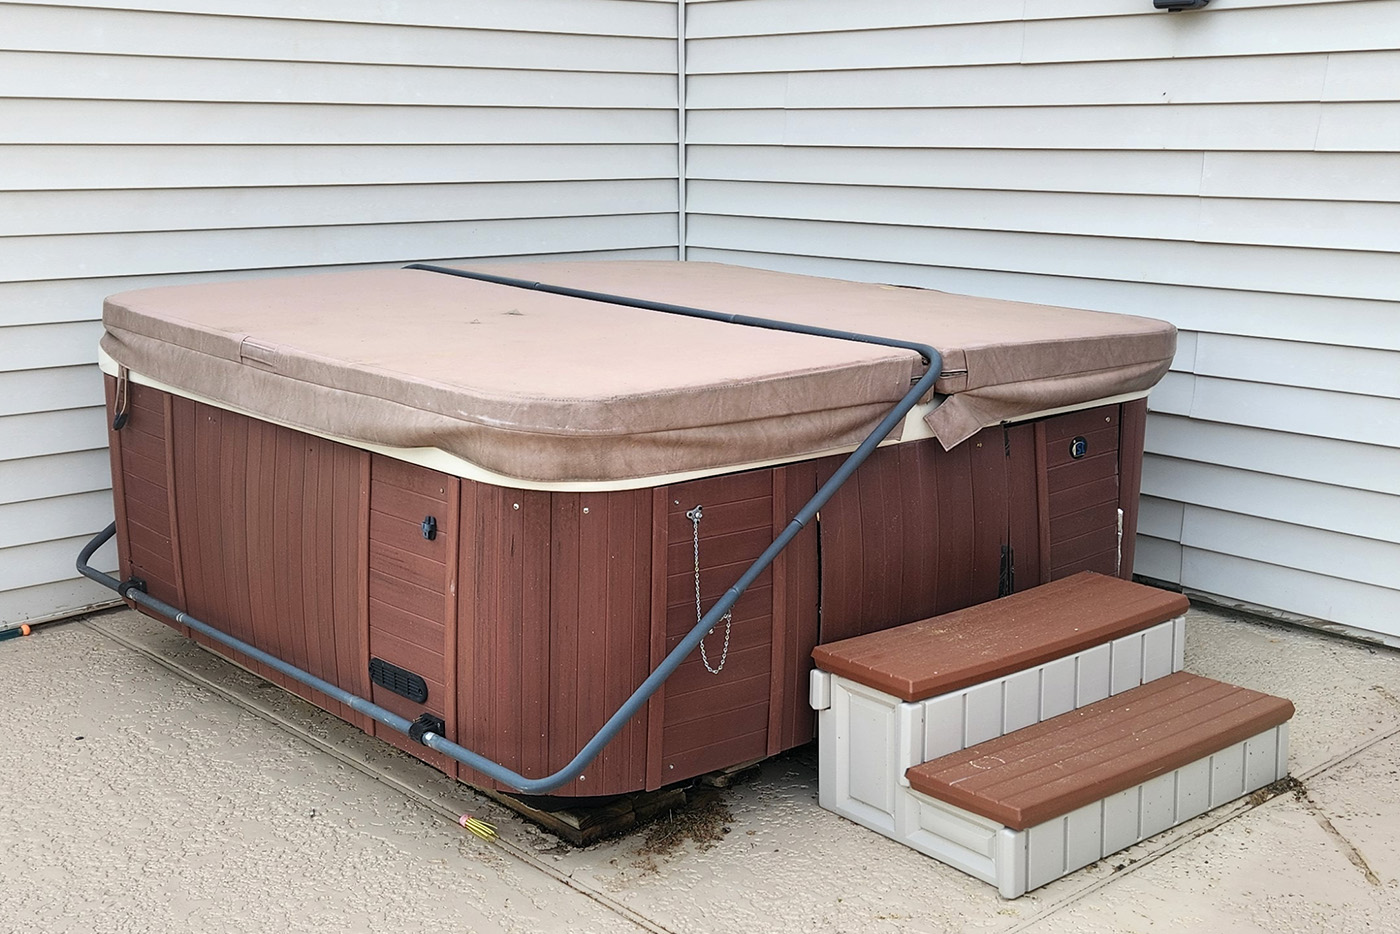 Top Hot Tub Removal in St. Charles and St. Louis County Missouri by Swift Haul Junk Removal